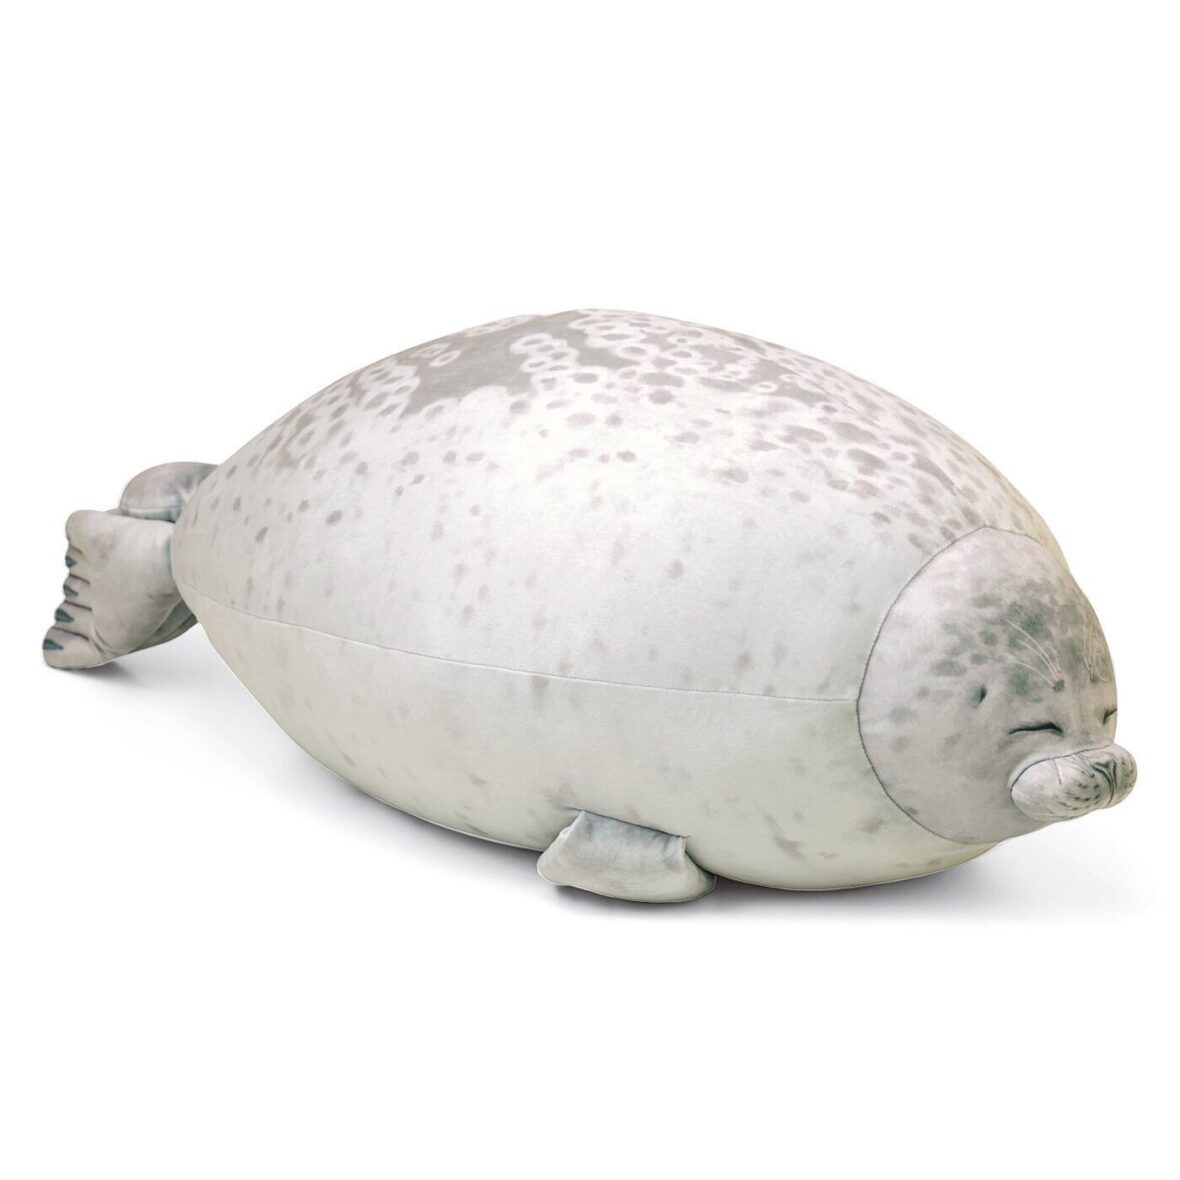 Squinted Seal Soft Stuffed Plush Toy